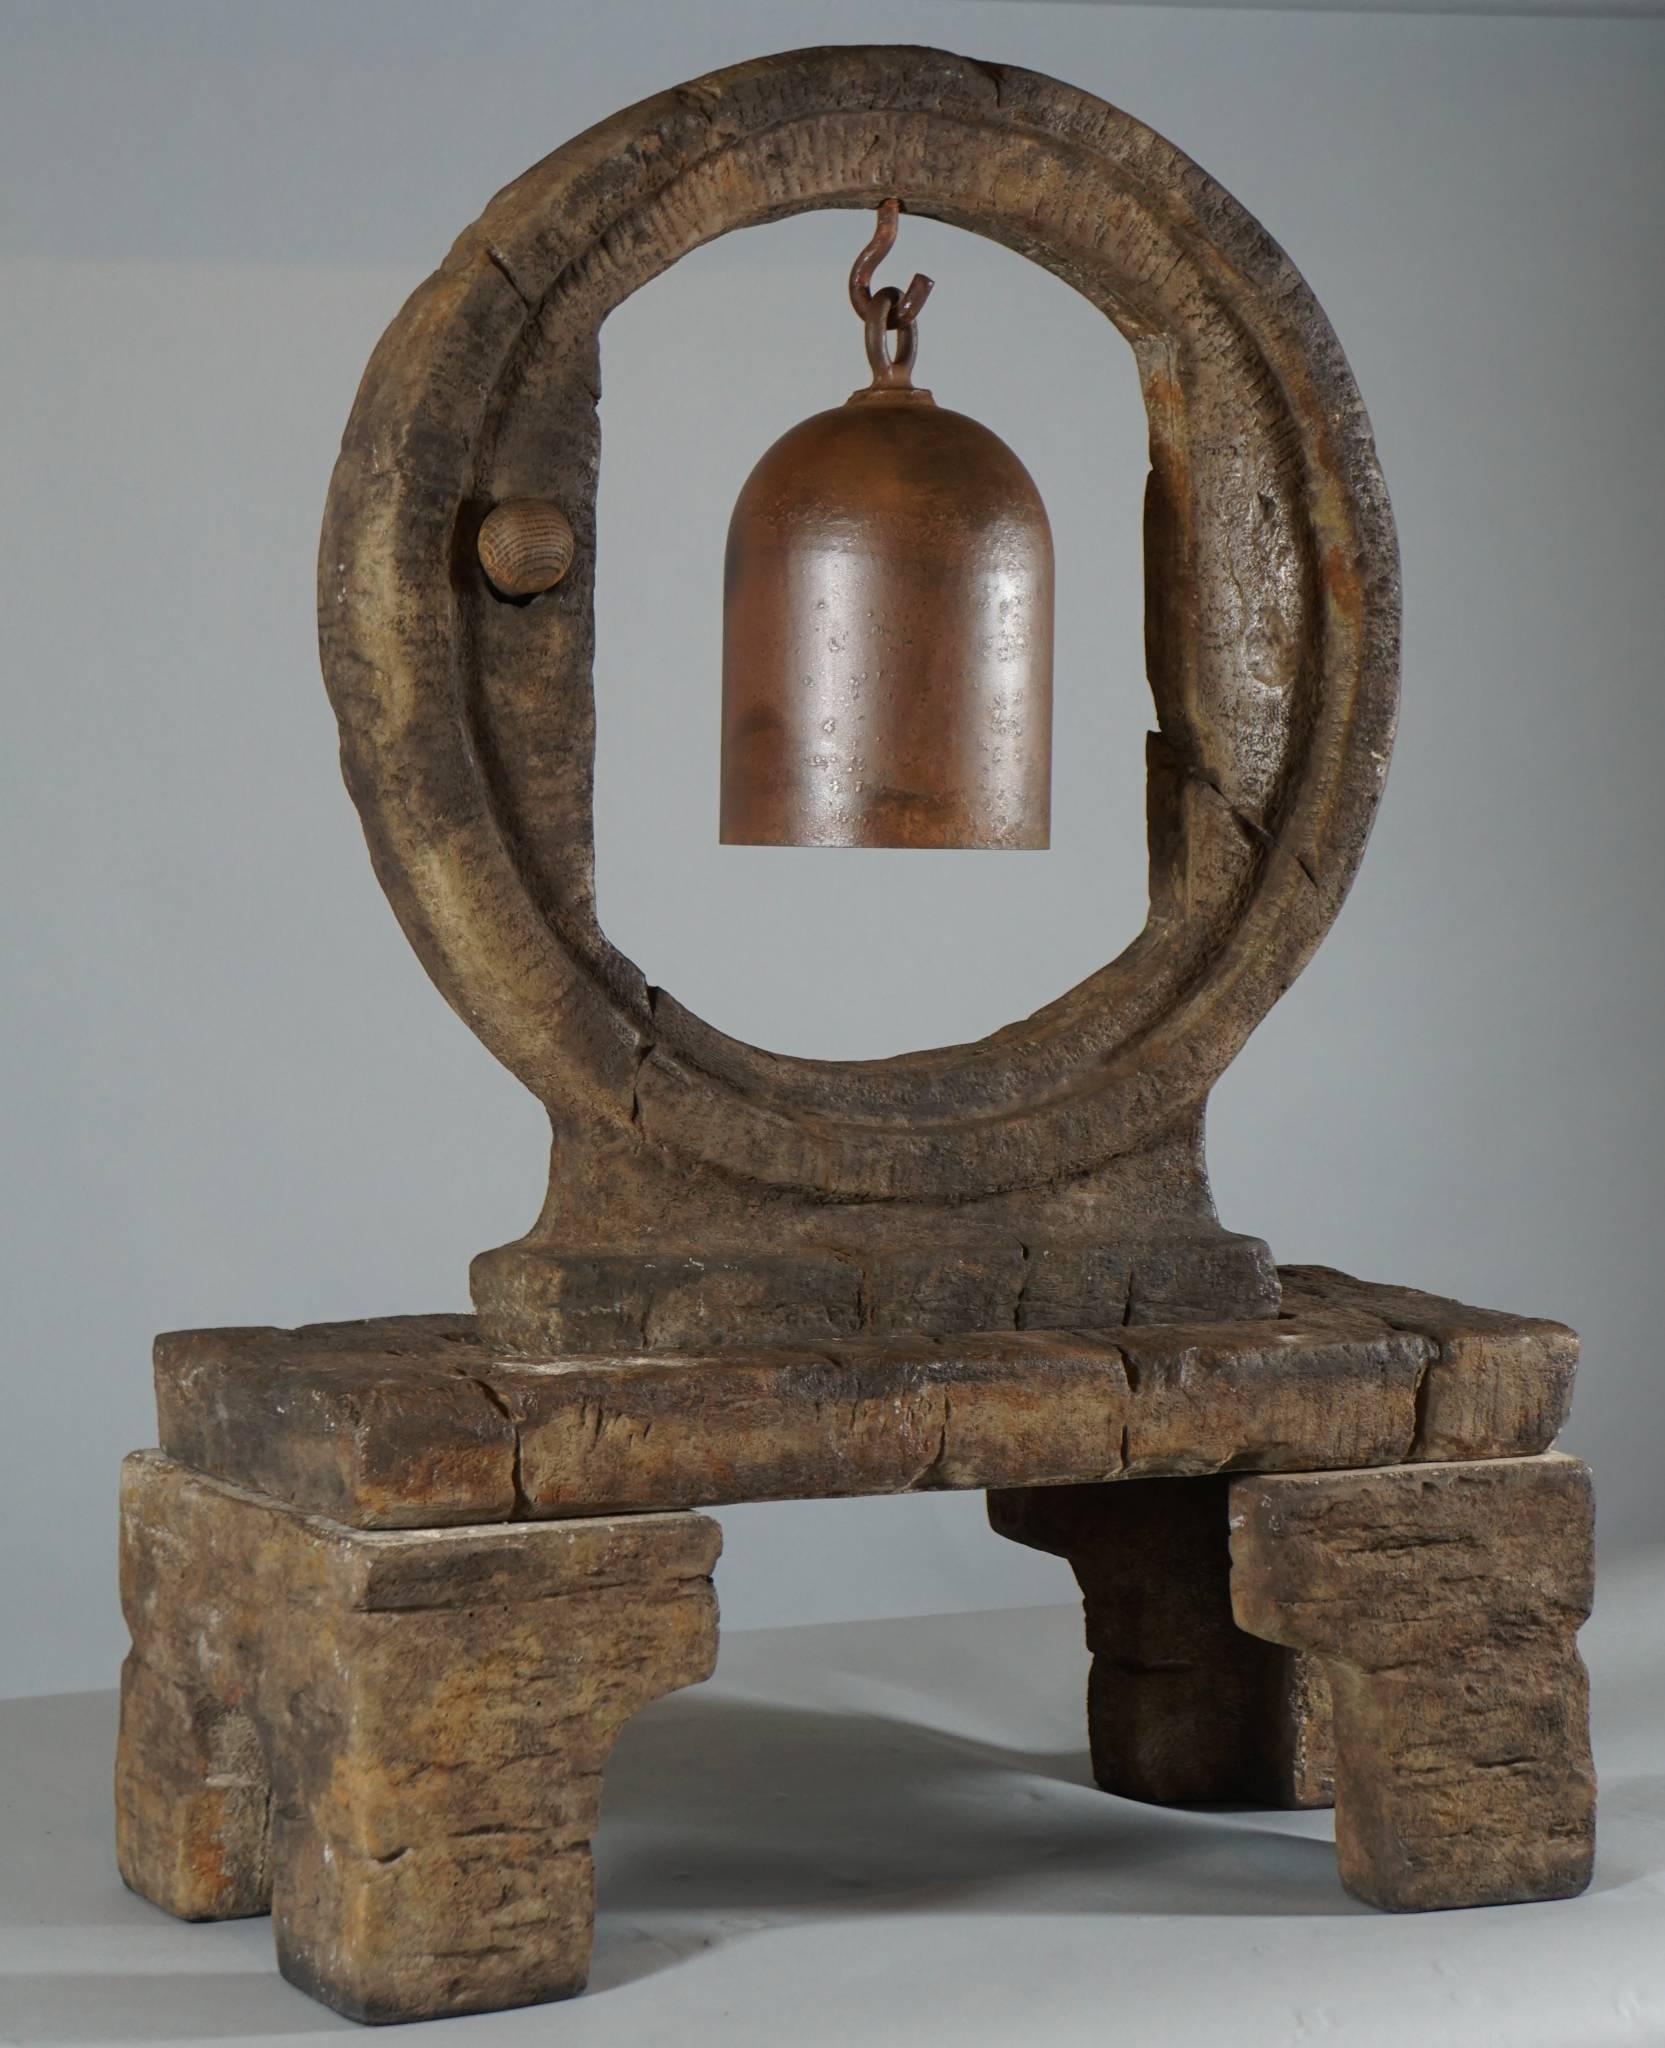 Resonant Iron Bell Suspended in Large Cast Stone Wheel on Stand 3